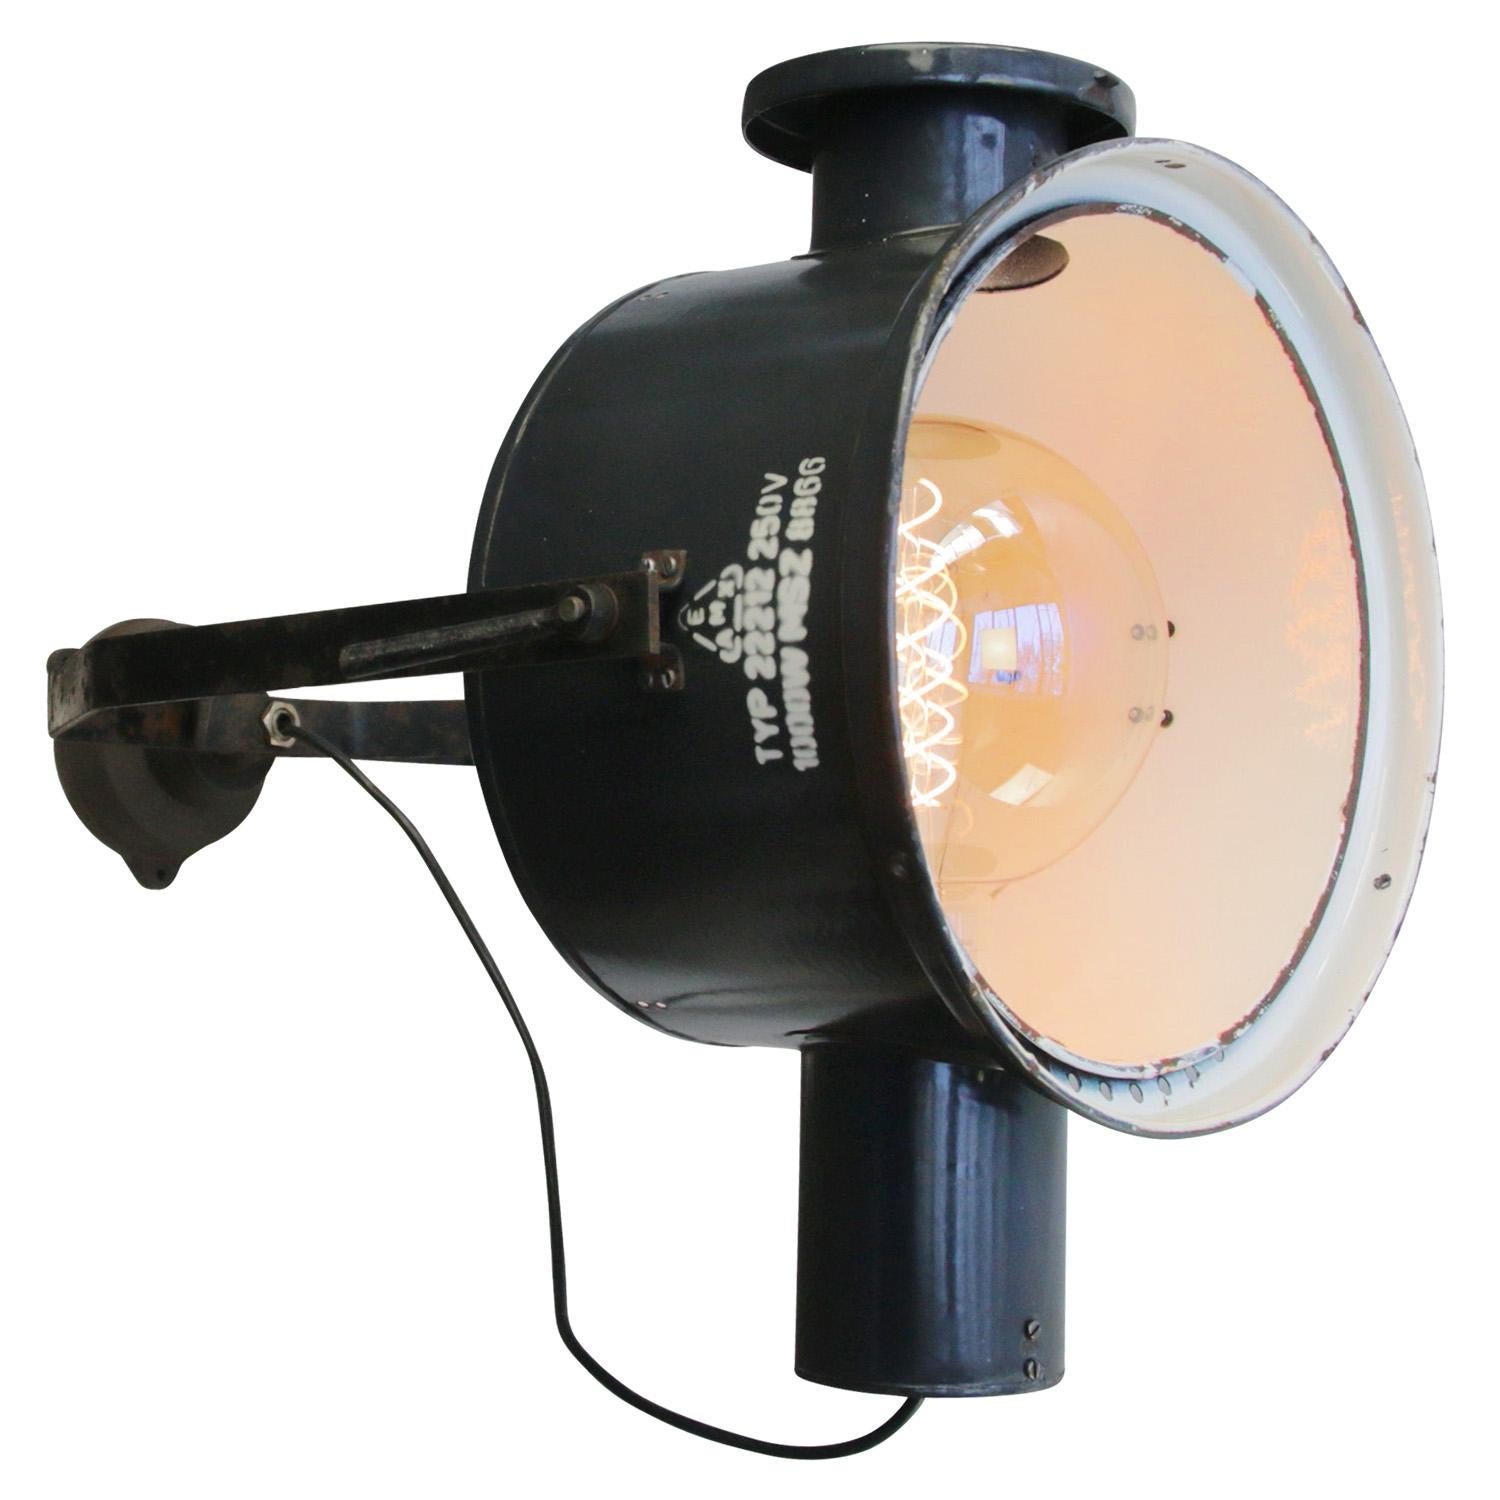 Blue enamel, cast iron parts and wall piece
Adjustable industrial wall light

Diameter wall mount 12 cm

Weight: 8.00 kg / 17.6 lb

Priced per individual item. All lamps have been made suitable by international standards for incandescent